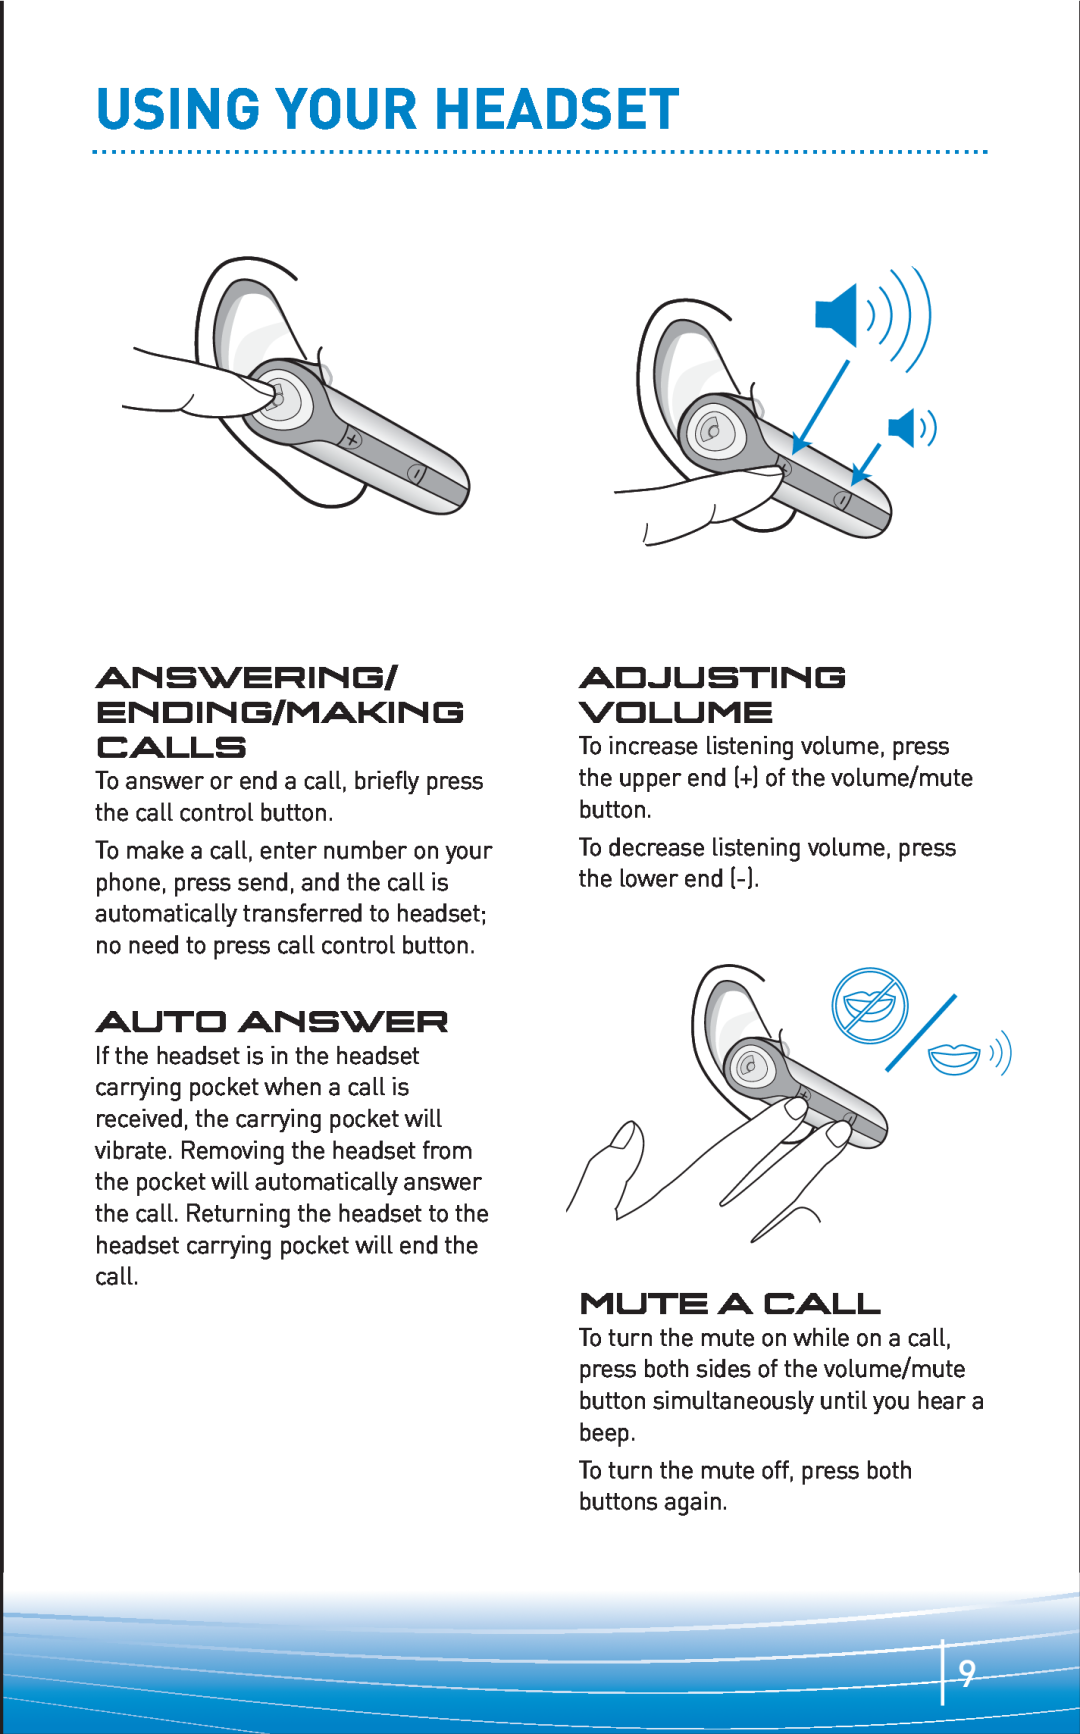 Plantronics 645 manual Using Your Headset, Answering Ending/Making Calls, Adjusting Volume, Auto Answer, Mute A Call 